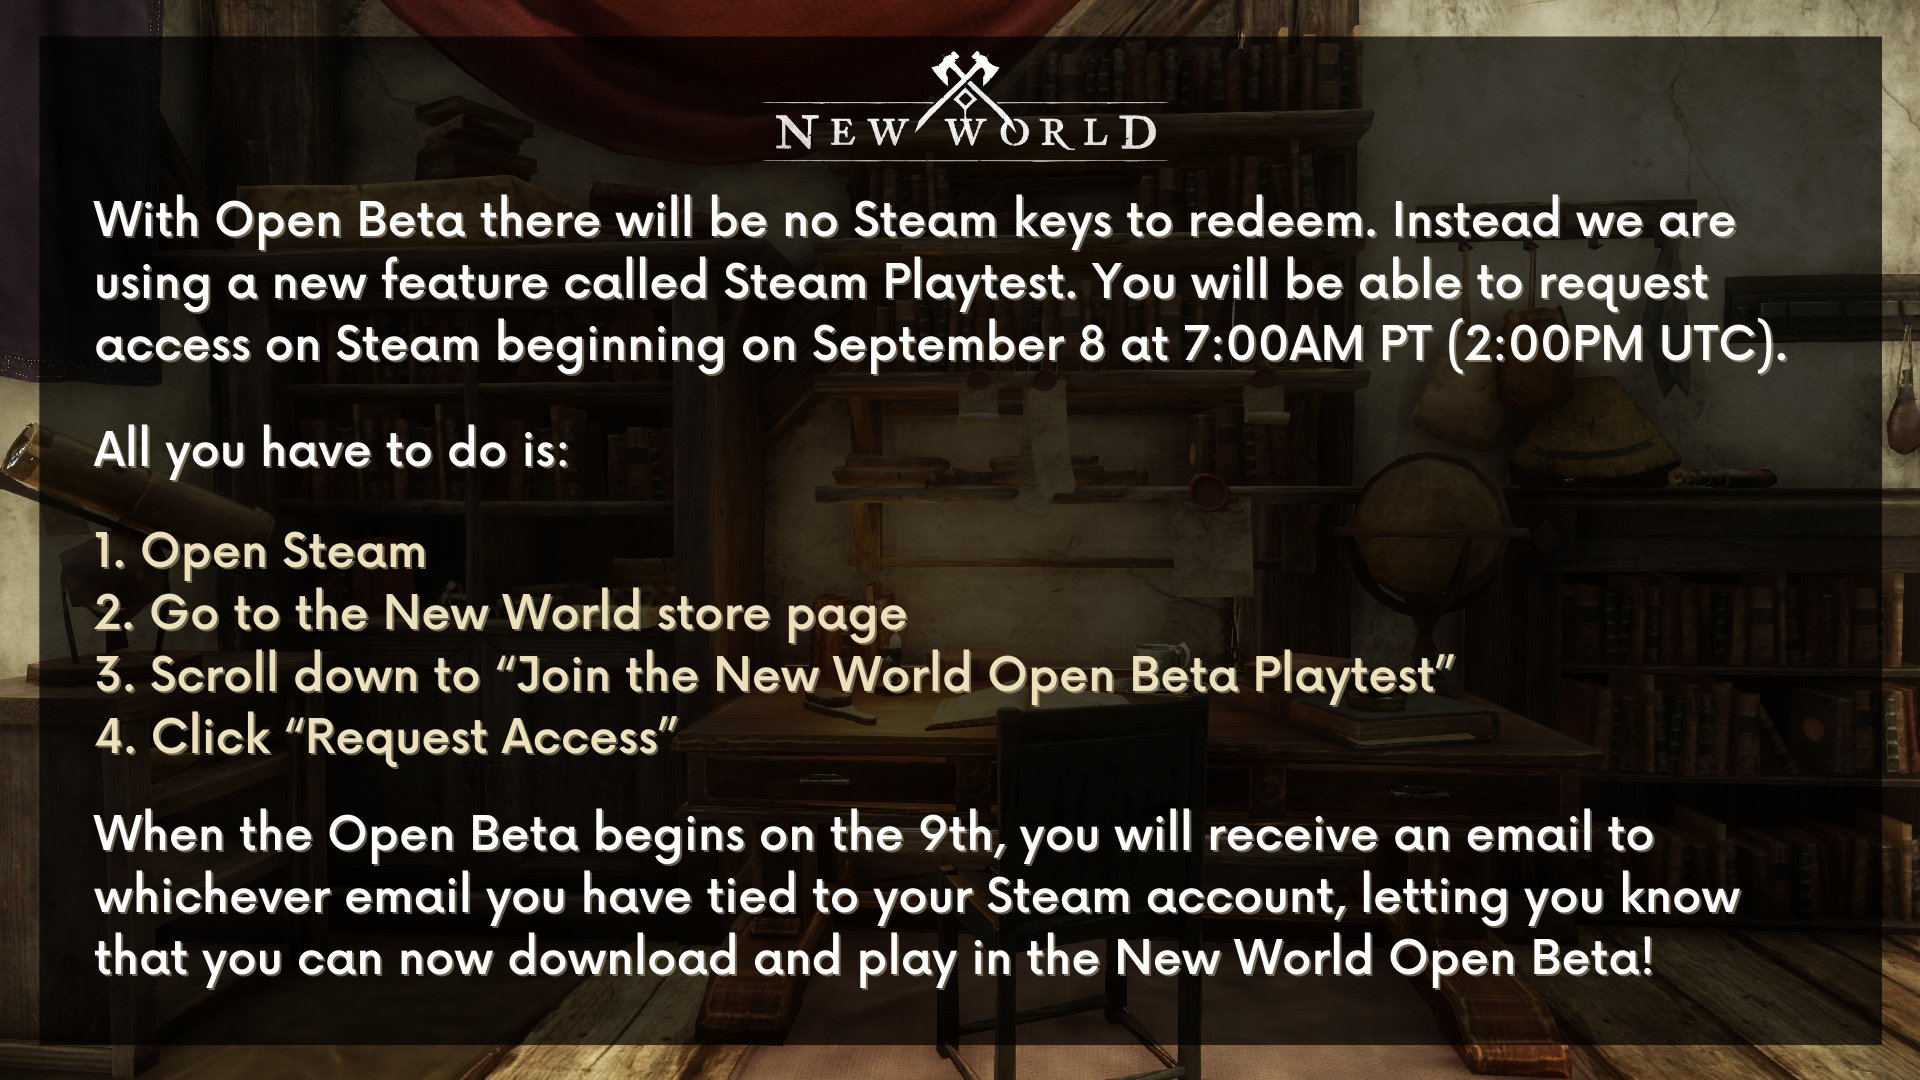 Will There Be an Open Beta Test?